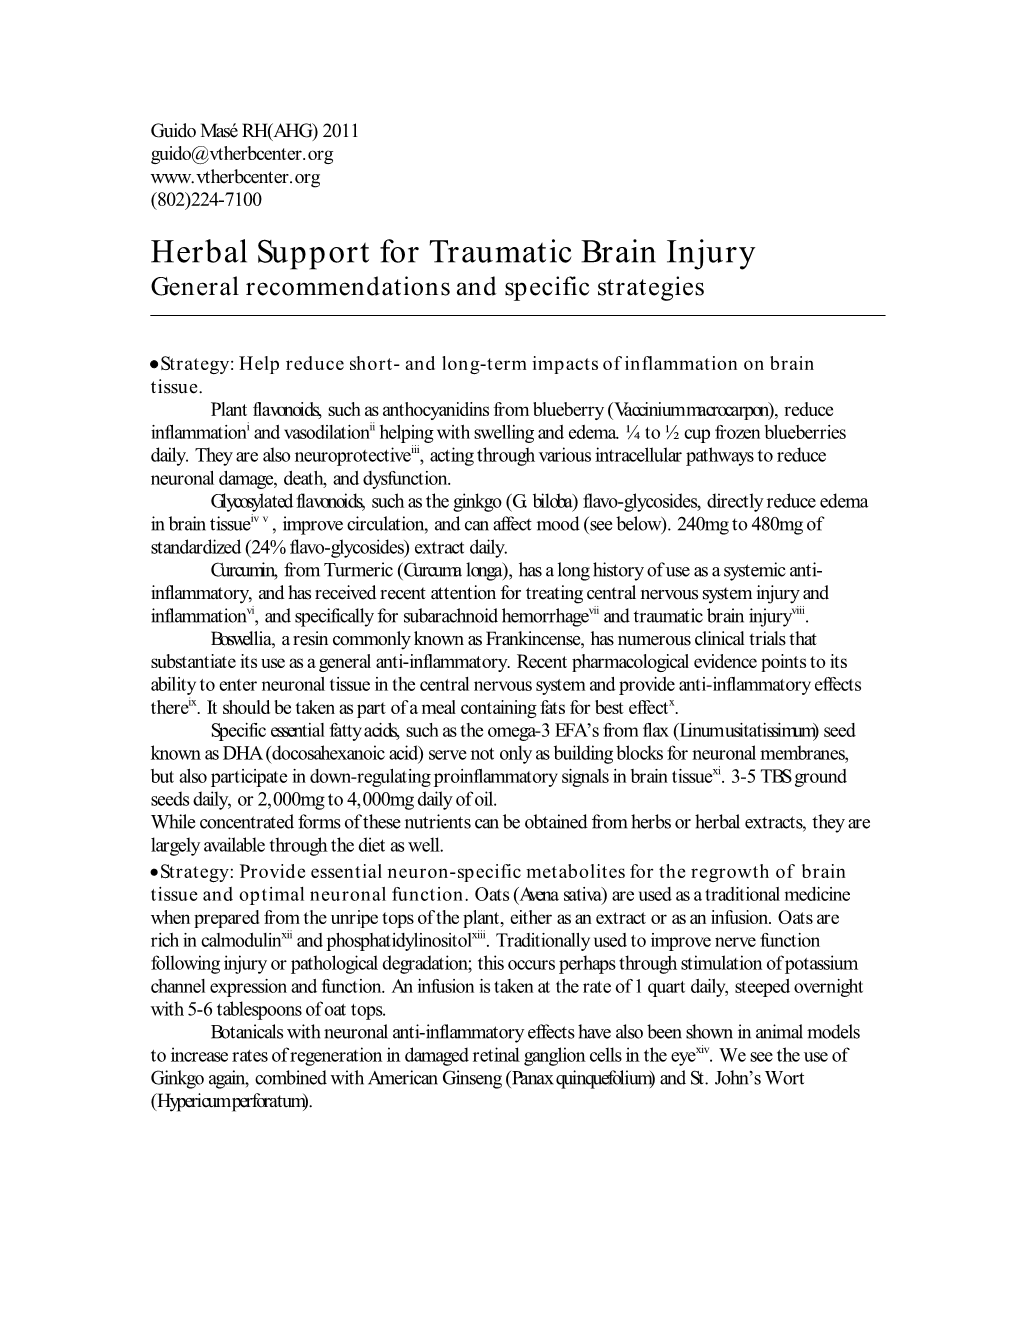 Herbal Support for Traumatic Brain Injury General Recommendations and Specific Strategies